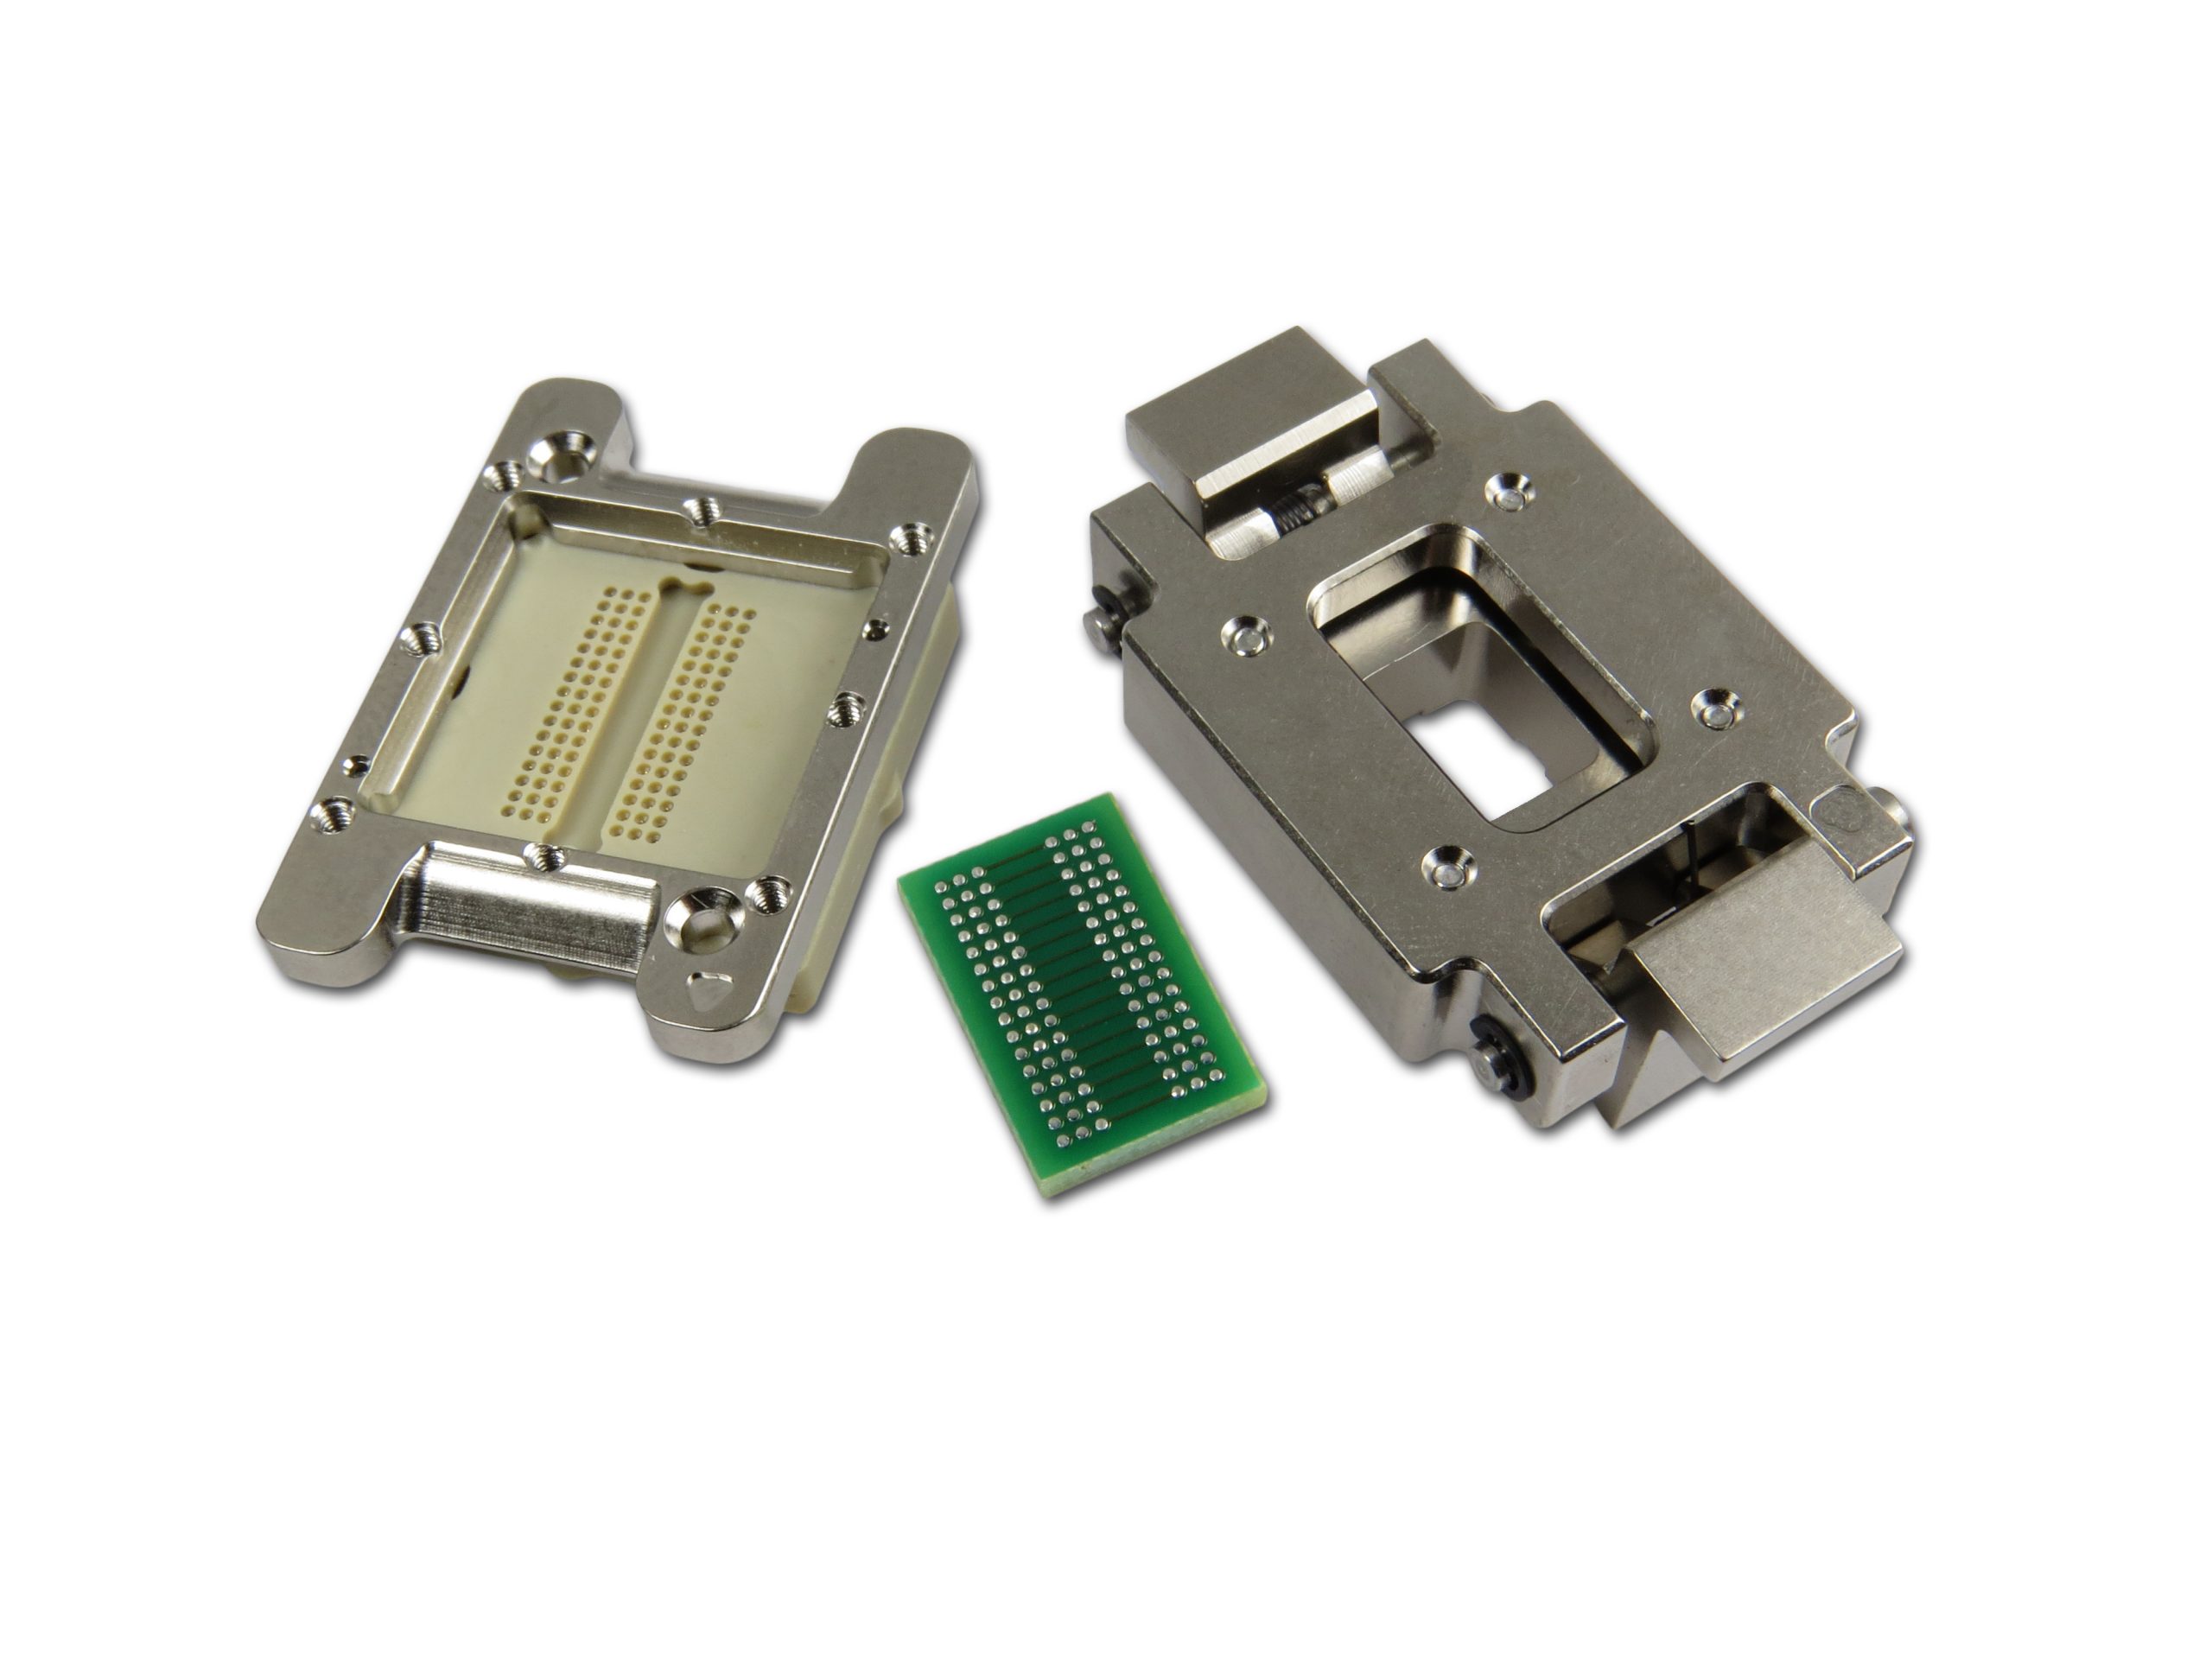 Stamped Spring Pin Universal BGA Socket for Memory Devices